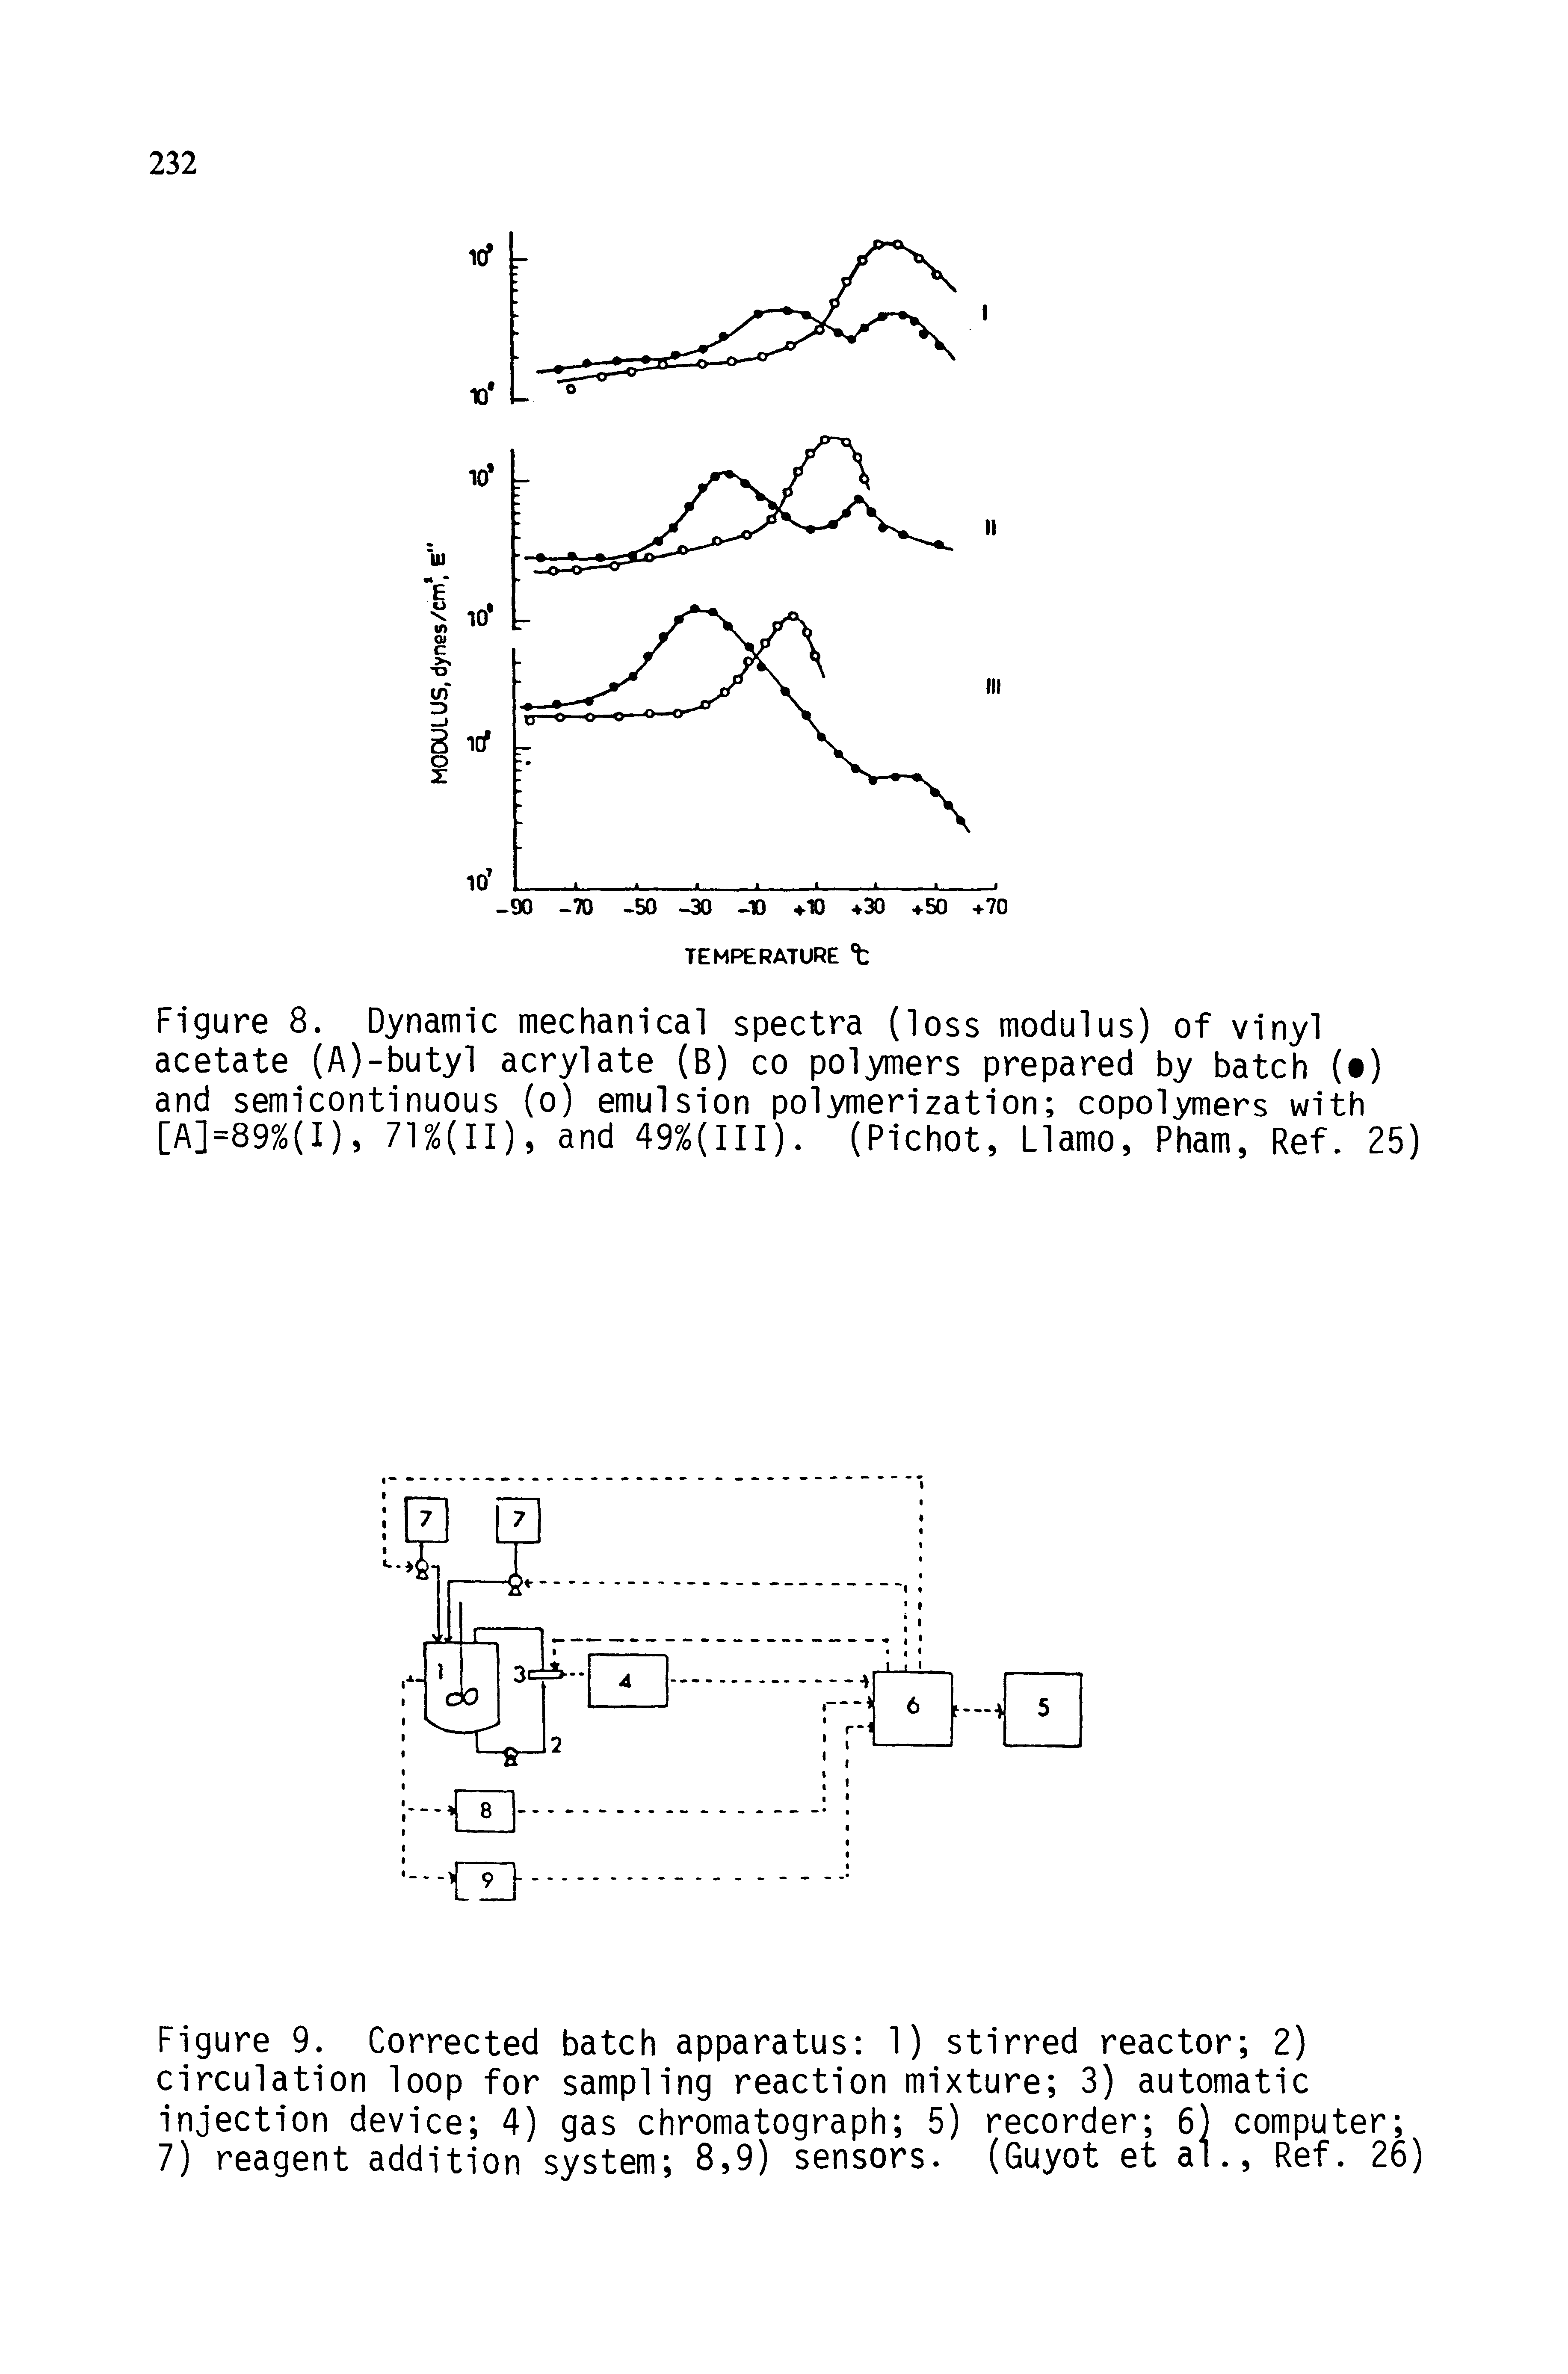 Figure 8. Dynamic mechanical spectra (loss modulus) of vinyl acetate (A)-butyl acrylate (B) co polymers prepared by batch ) and semicontinuous (o) emulsion polymerization copolymers with [A]=89%(I), 71%(II), and 49%(III). (Pichot, Llamo, Pham, Ref. 25)...